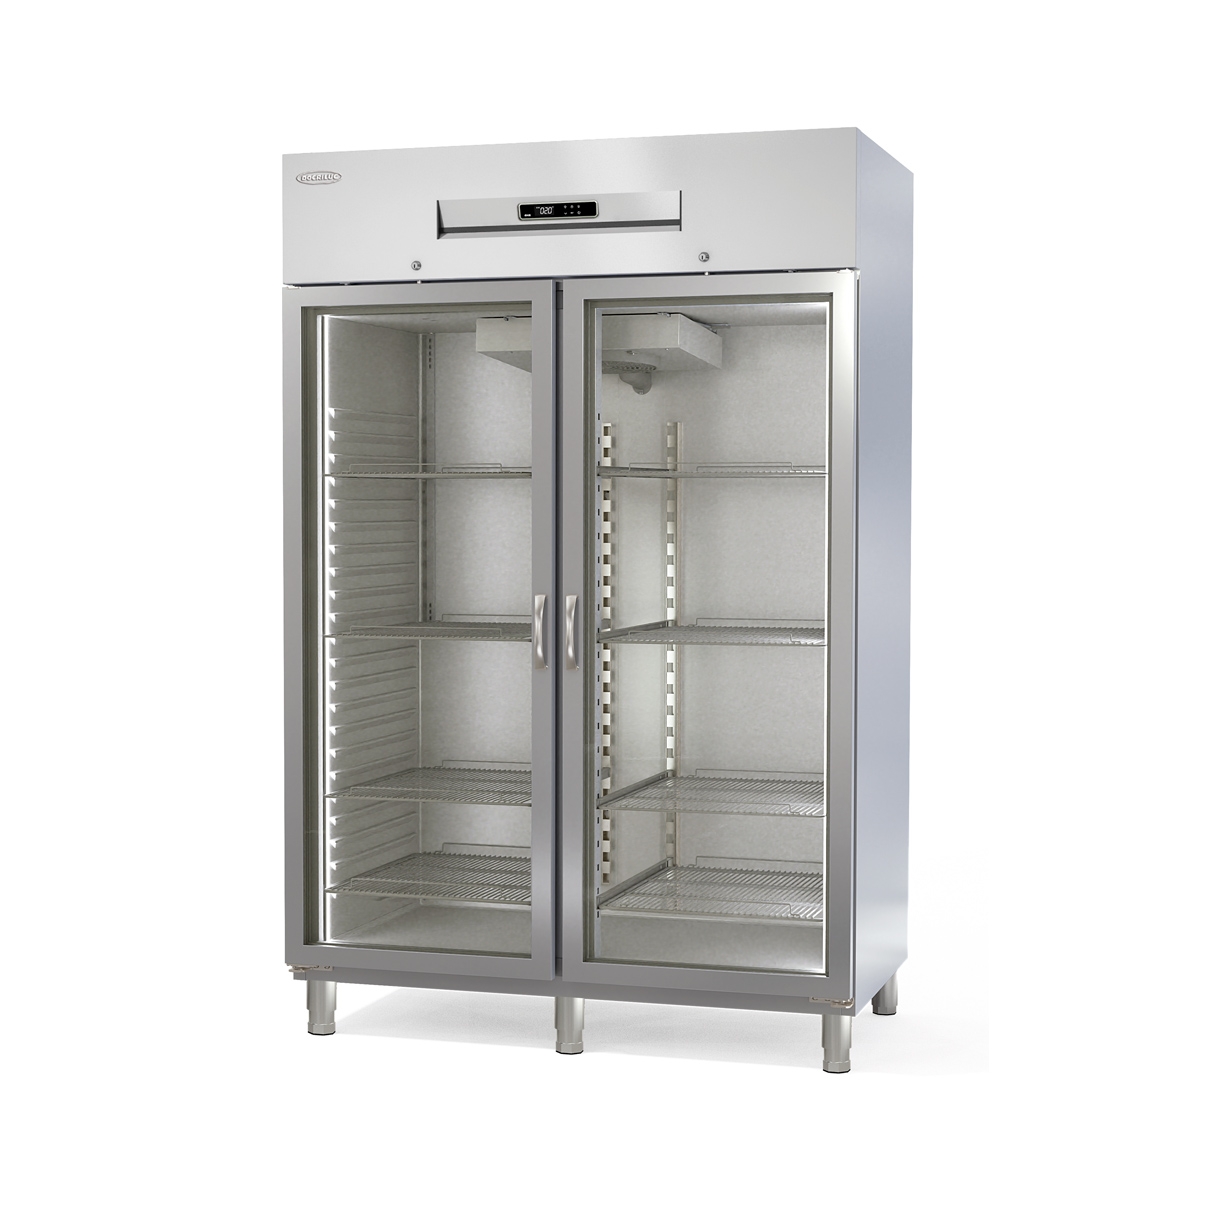 Gastronorm 2/1 Freezing Cabinet AGV-140-2-C